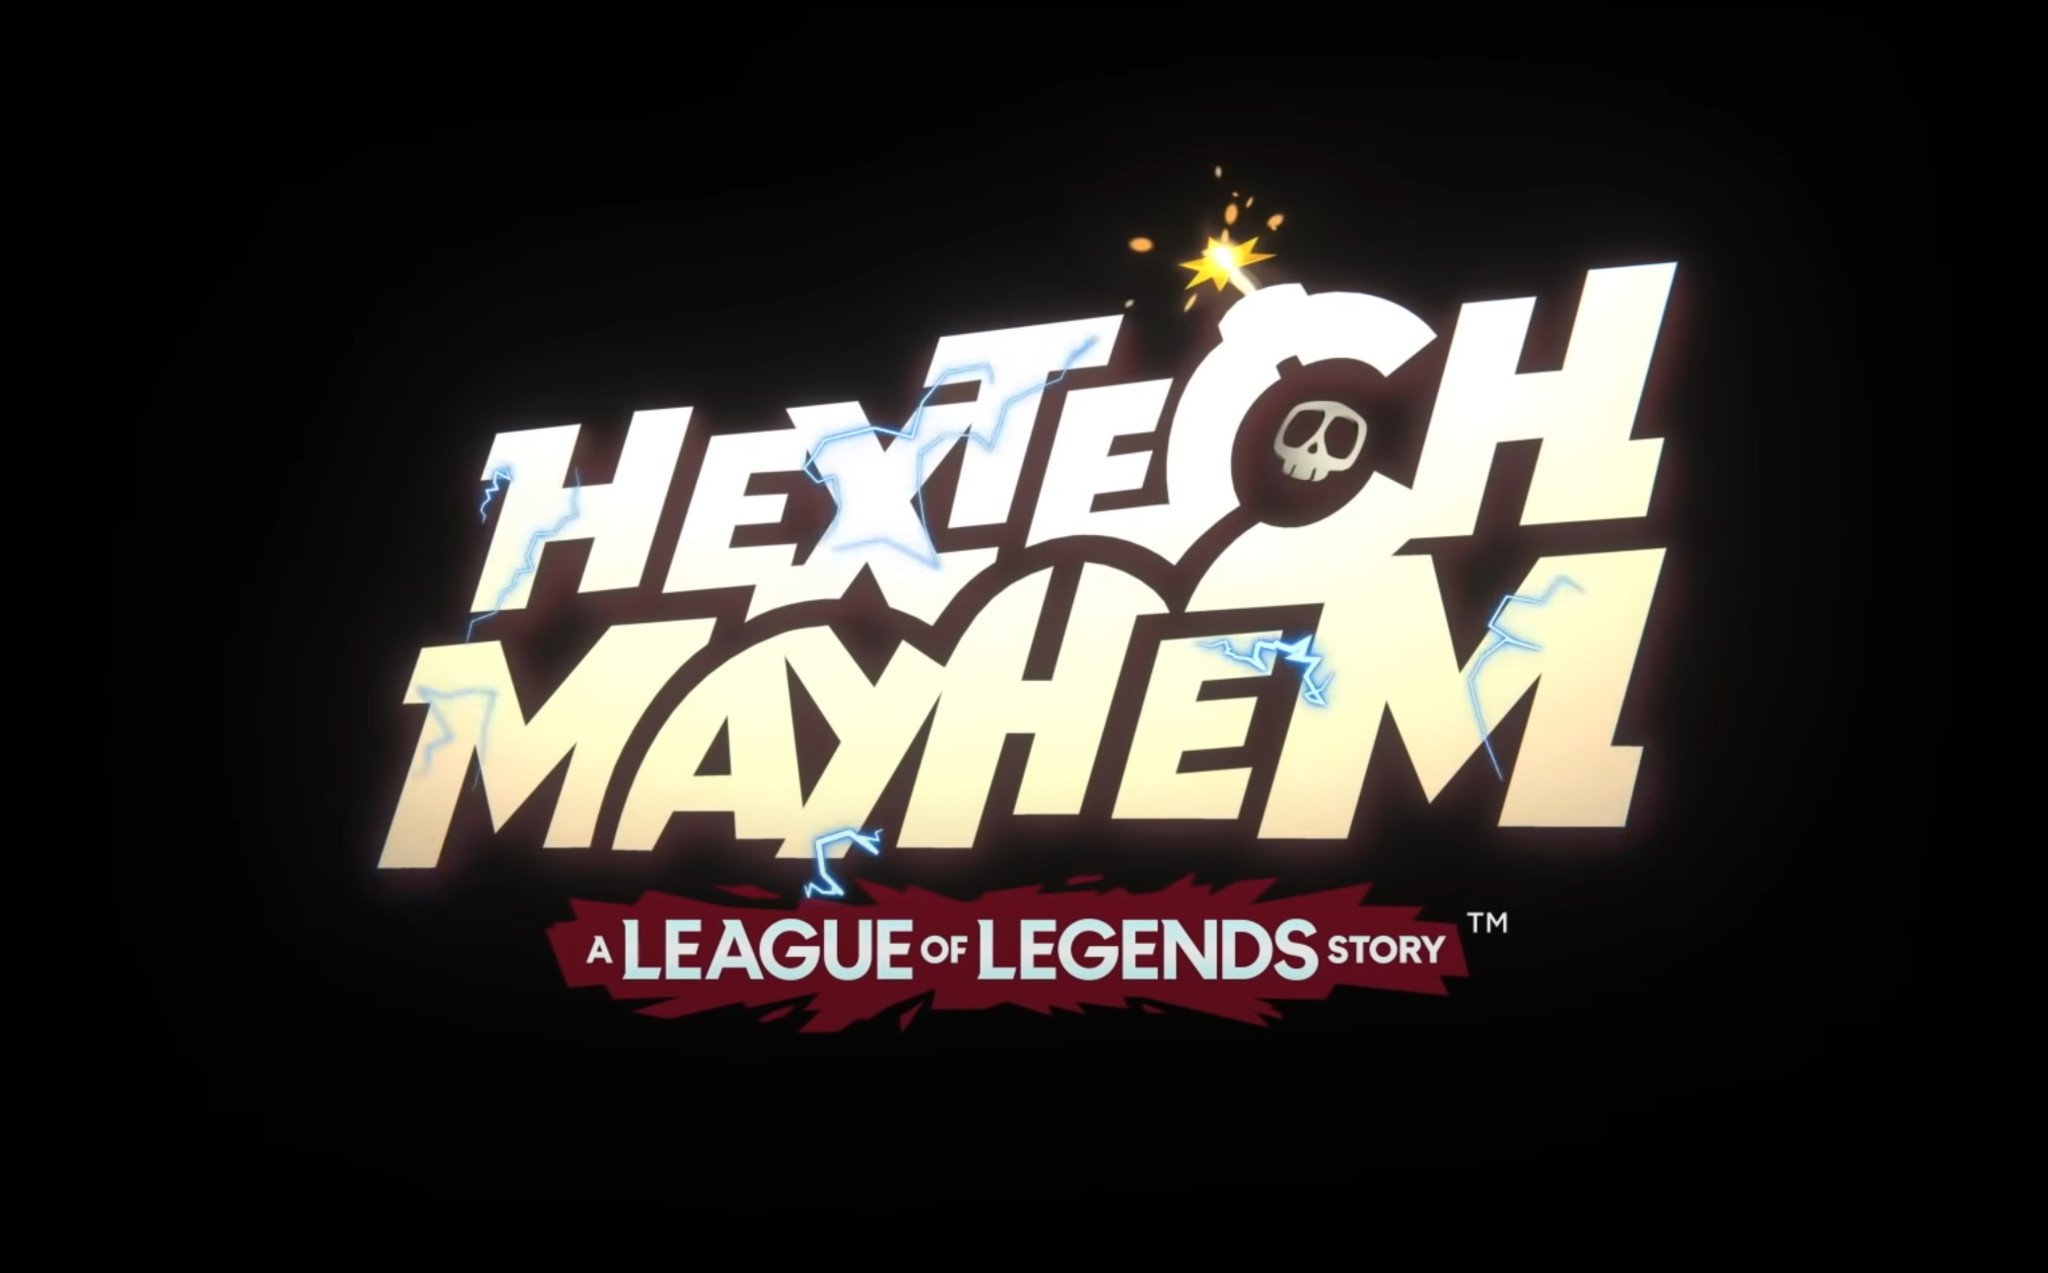 Hextech Mayhem comes to mobile as an exclusive to Netflix games